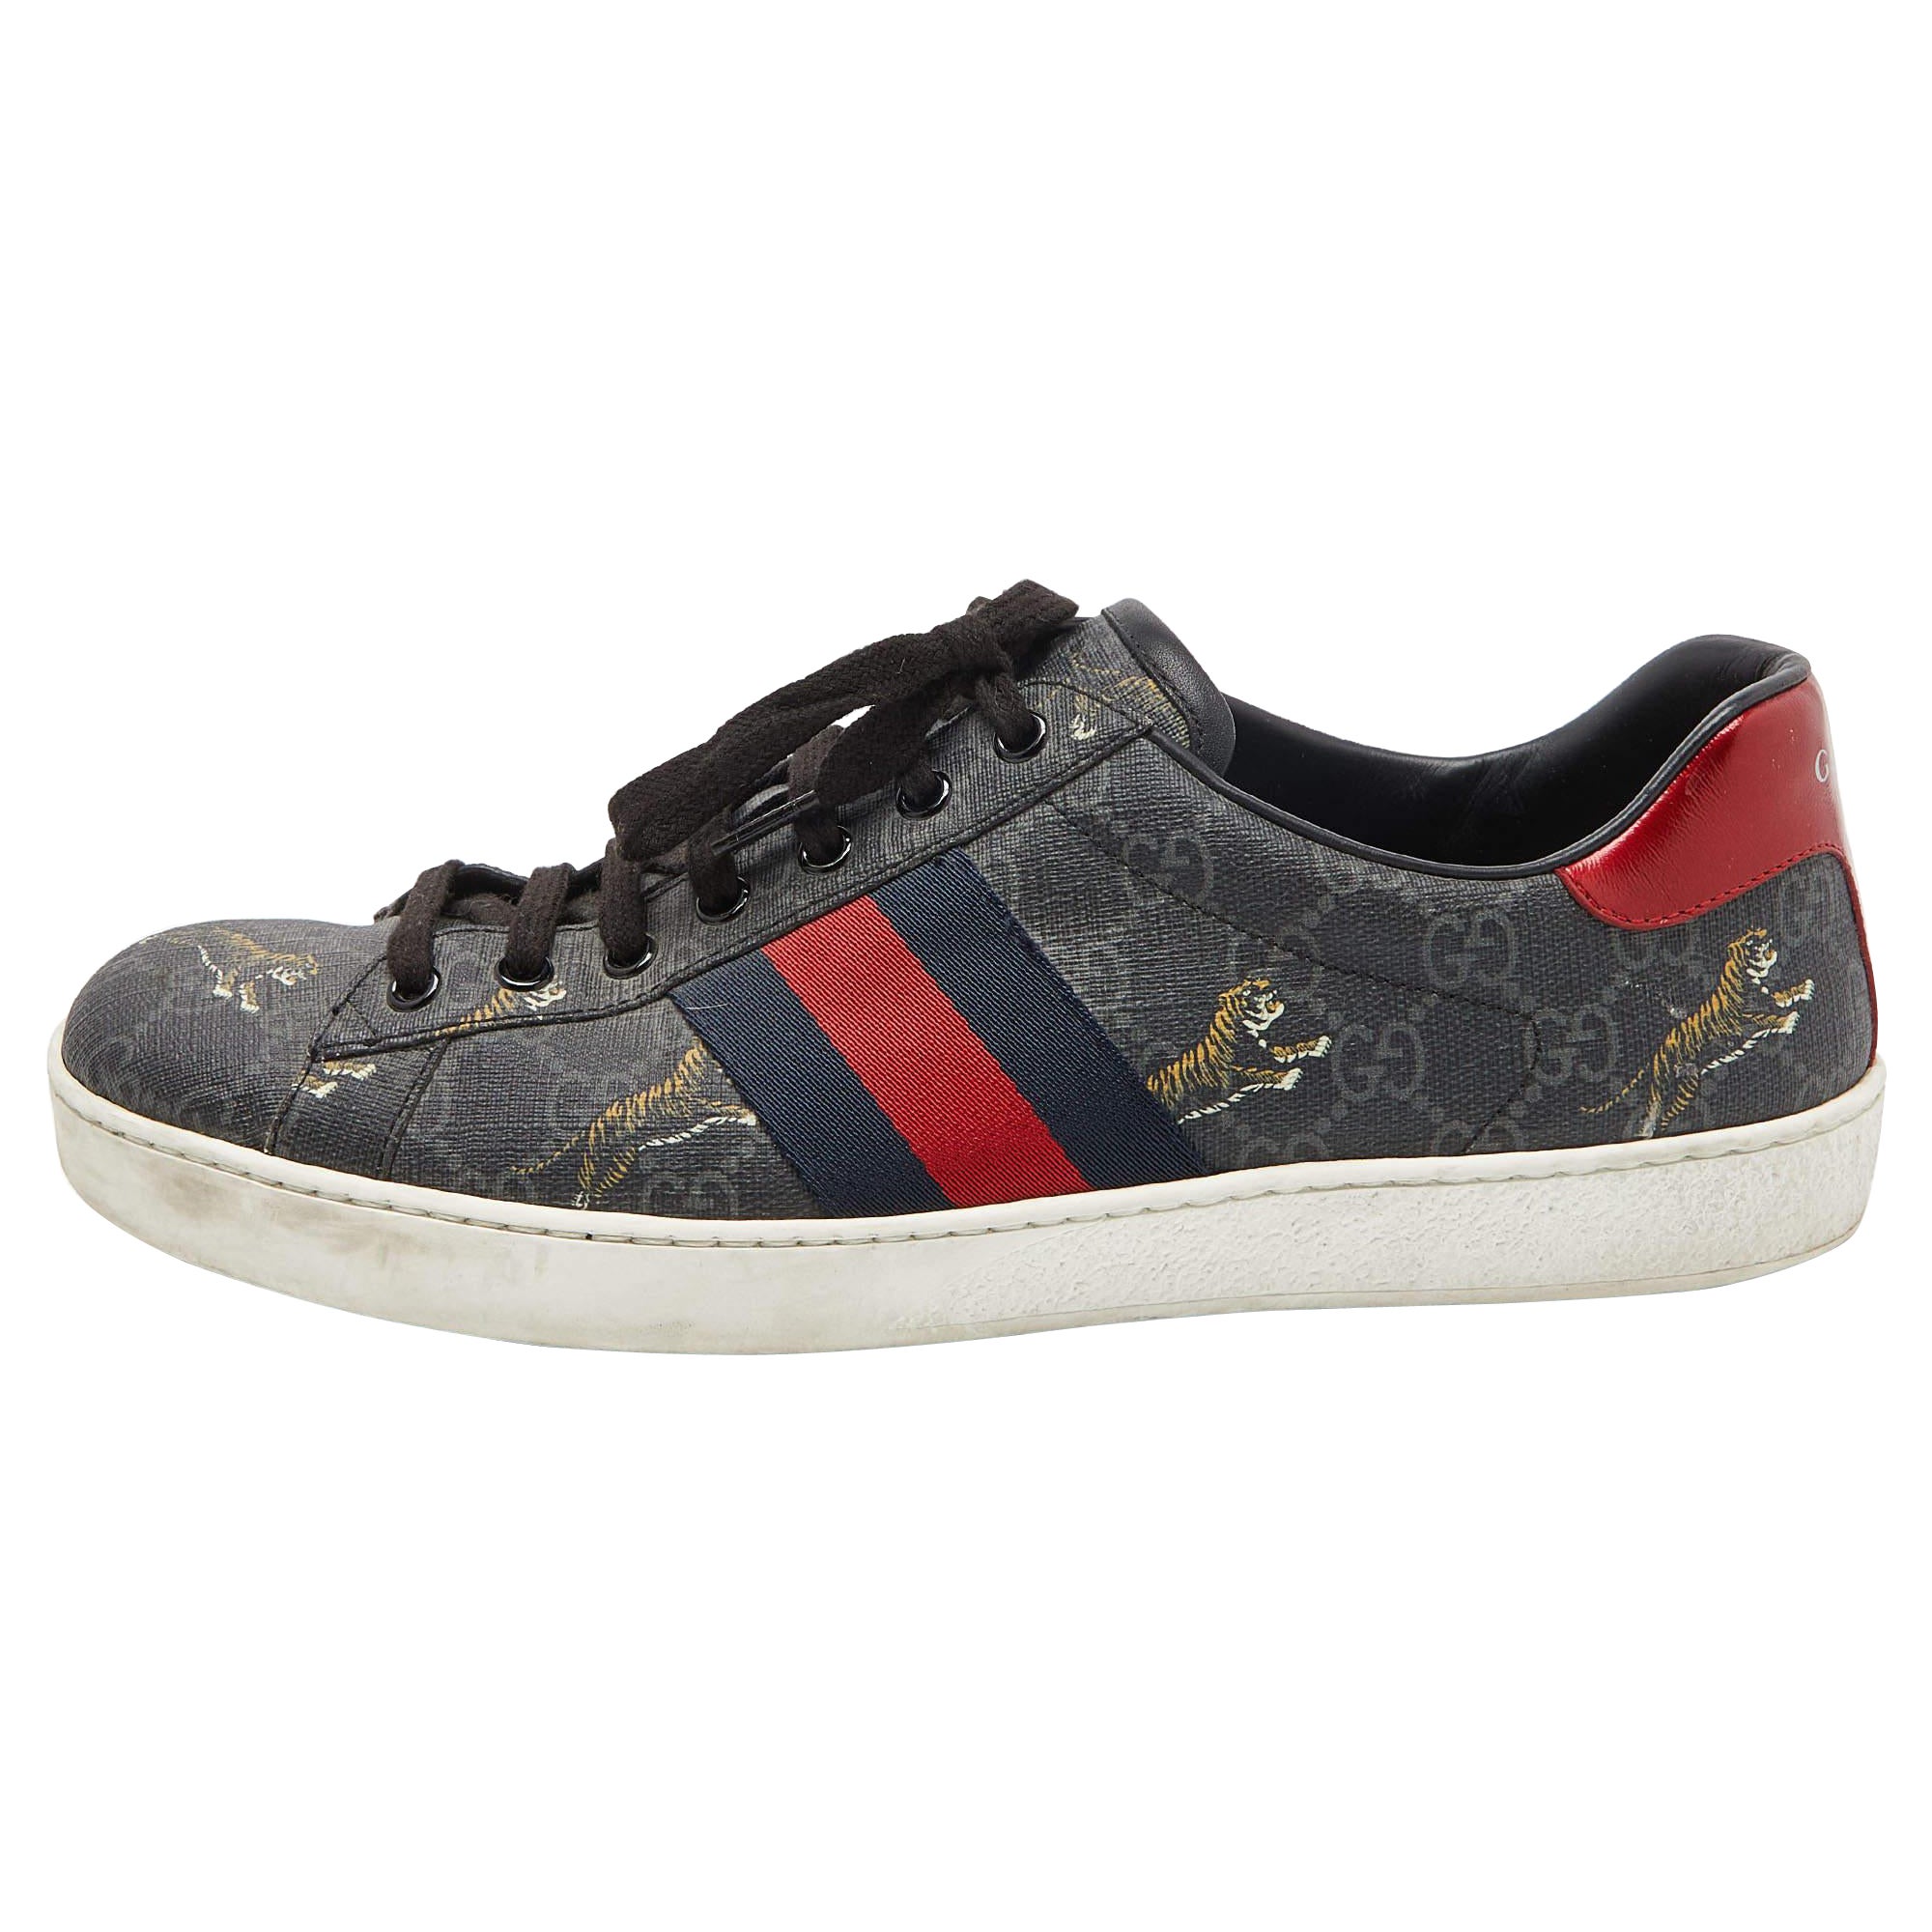 Gucci Black GG Supreme Canvas Web Ace Tiger Low Top Sneakers Size 43 For Sale